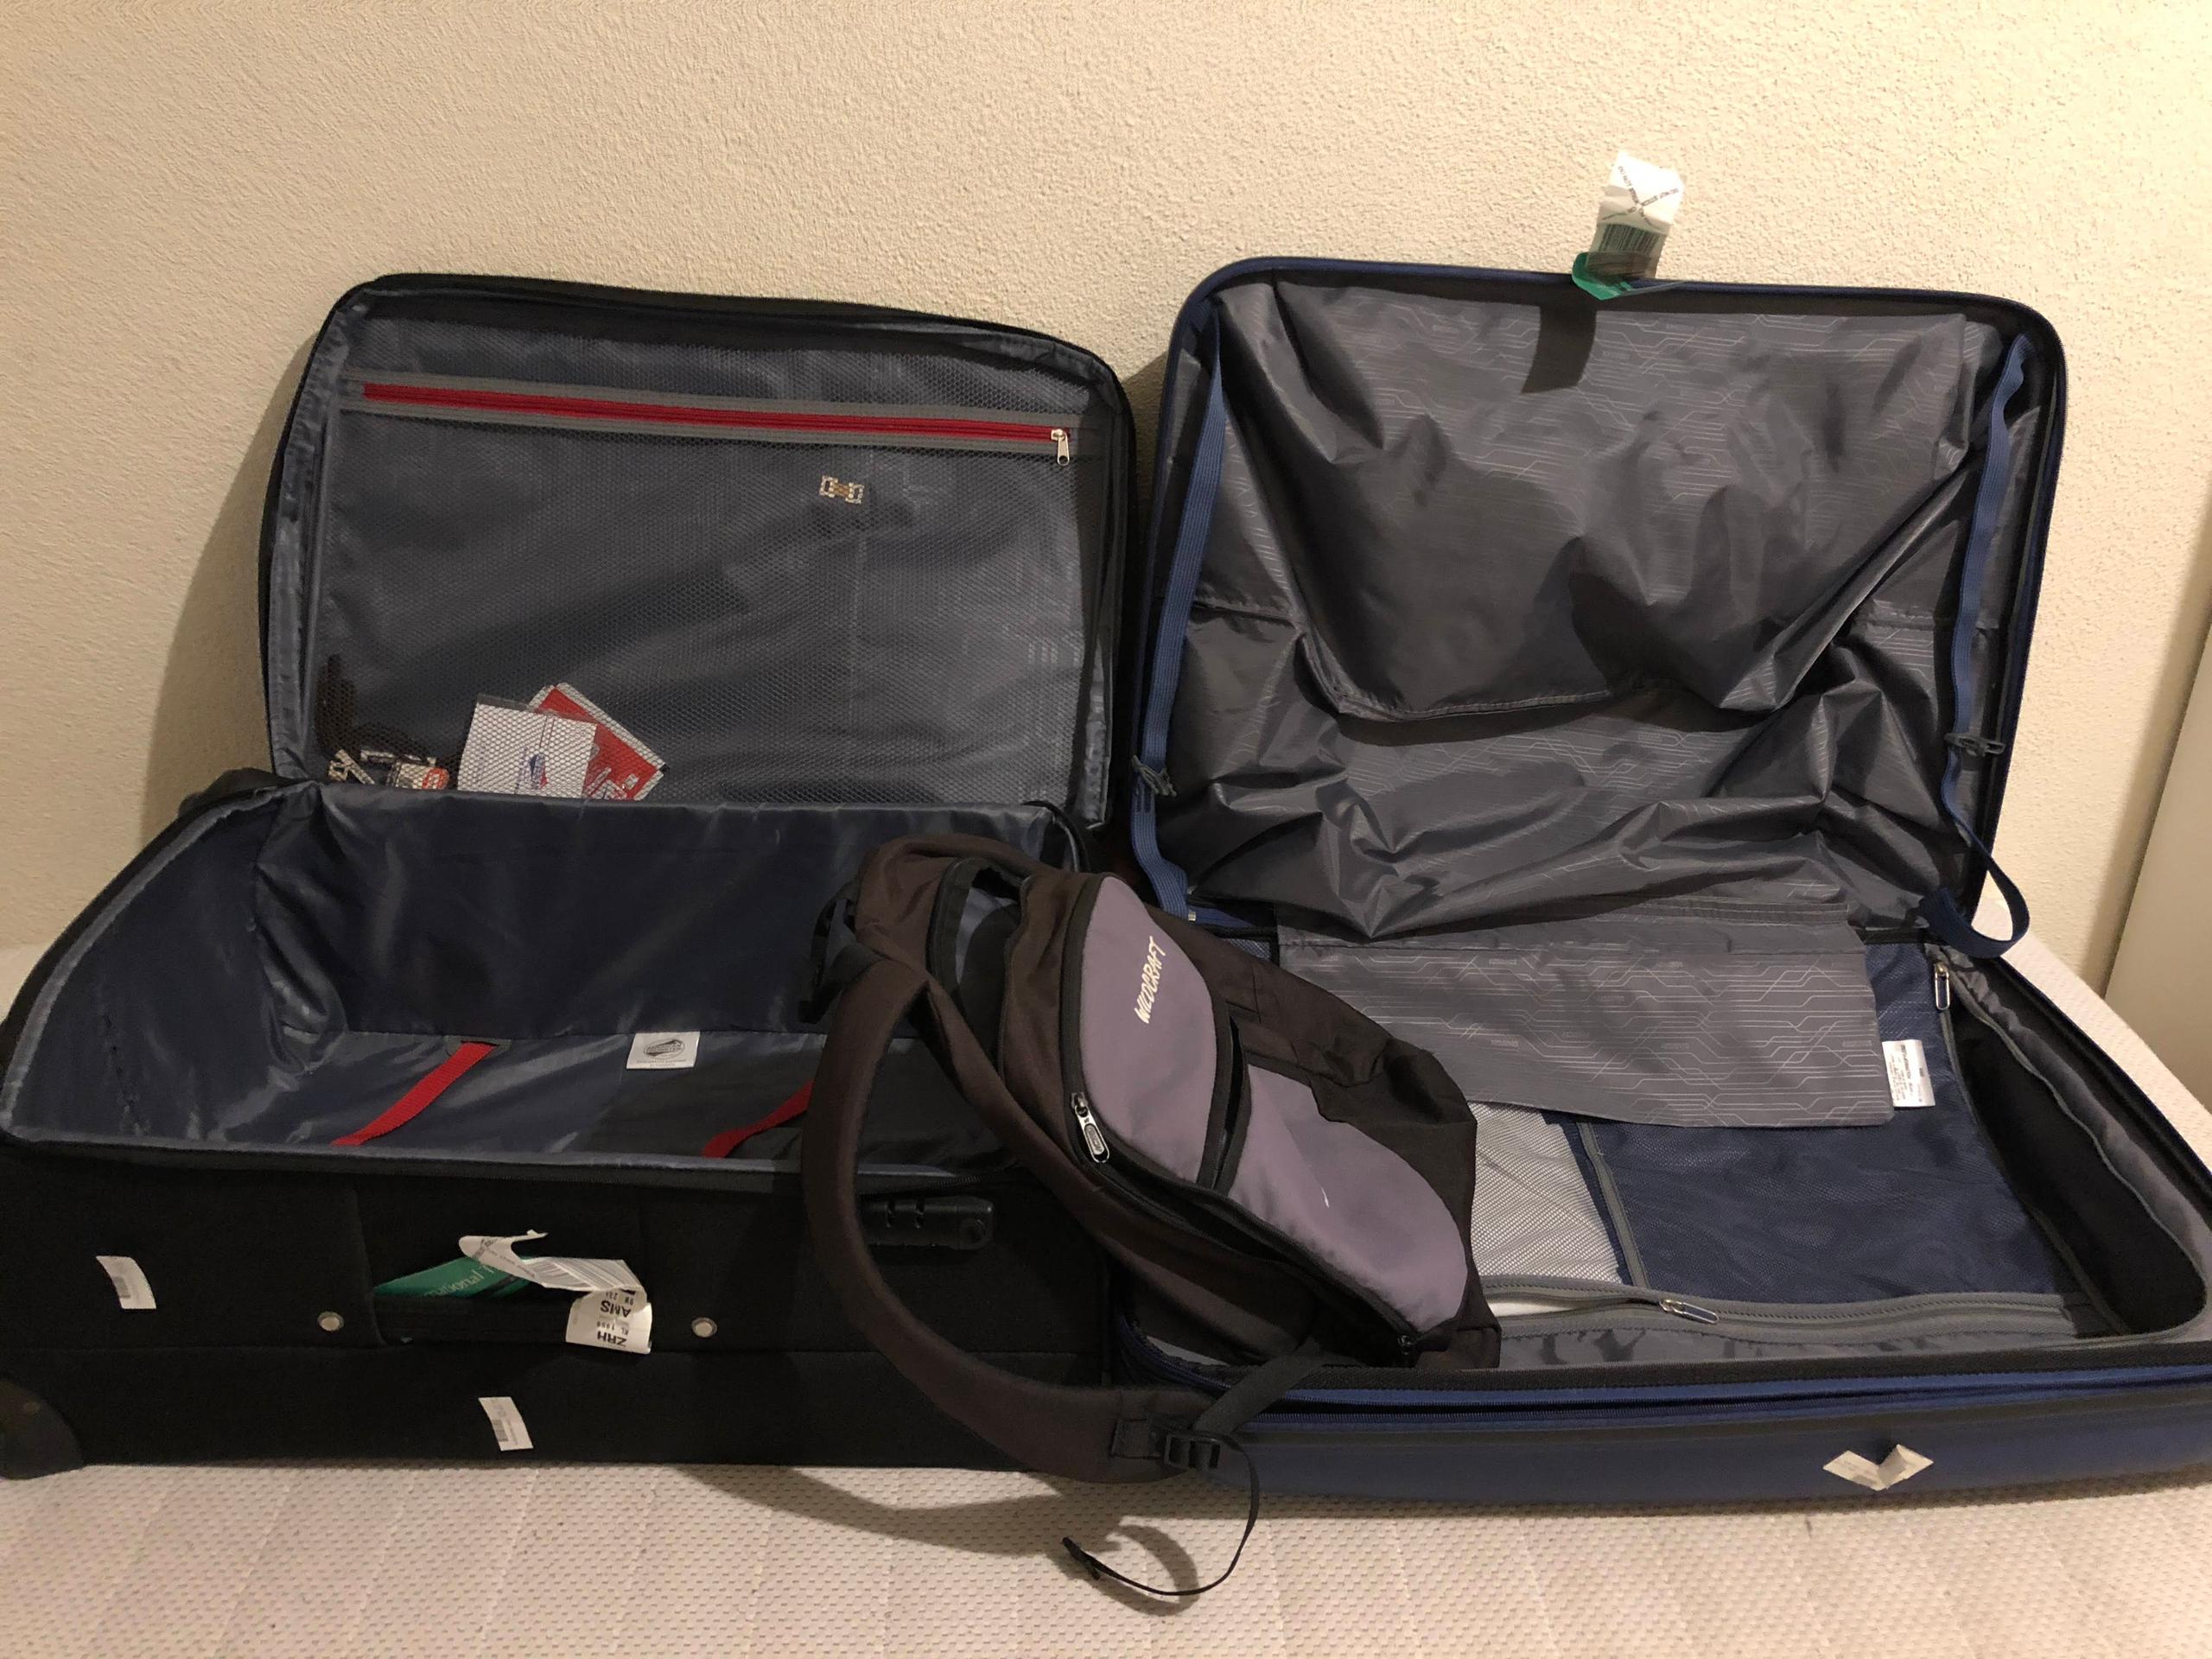 Two open suitcases